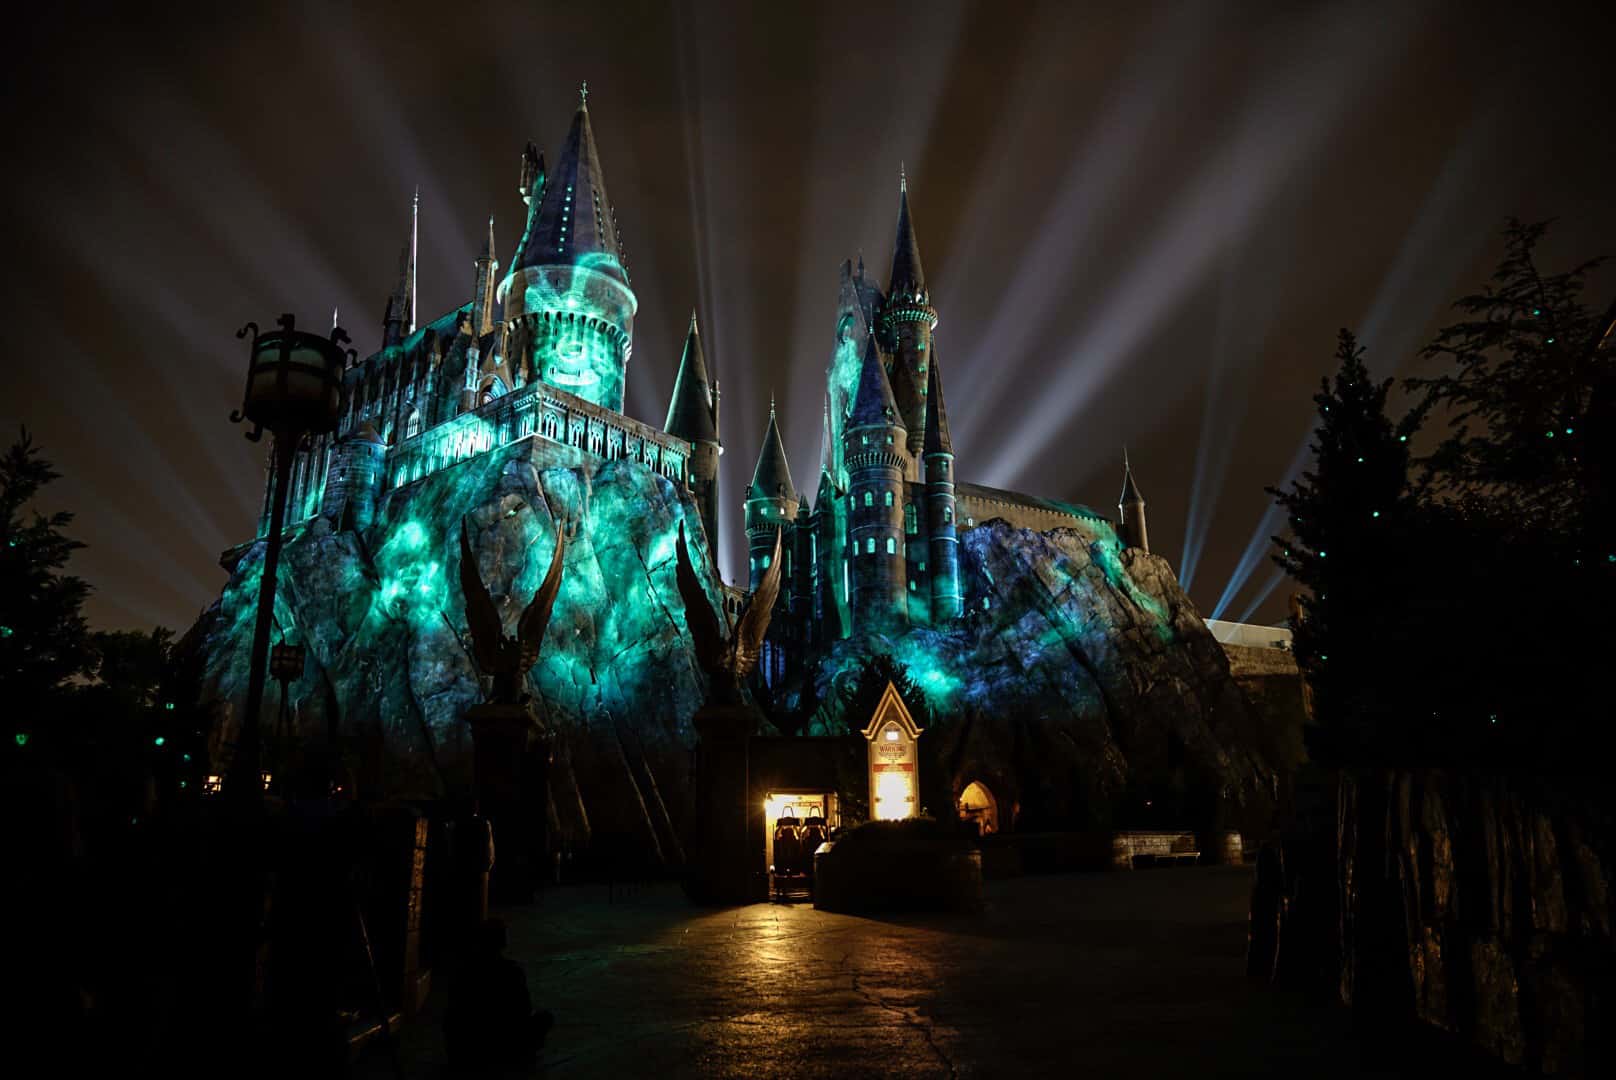 The Nighttime Lights at Hogwarts Castle at Universal's Islands of